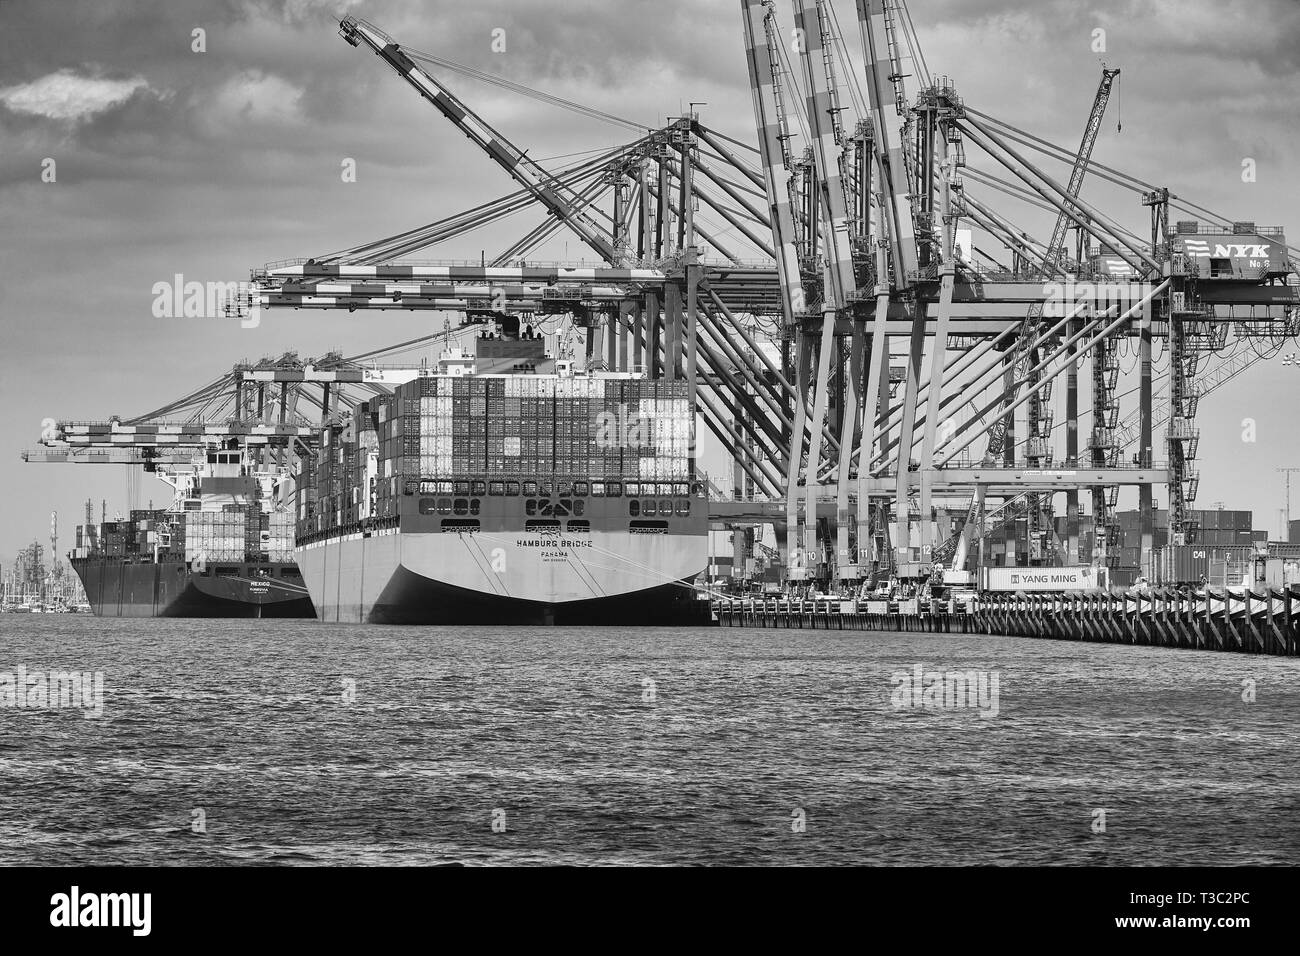 Black And White Photo Of The Container Ship, Hamburg Bridge, Loading And Unloading In The Port Of Los Angeles, California, USA. Stock Photo